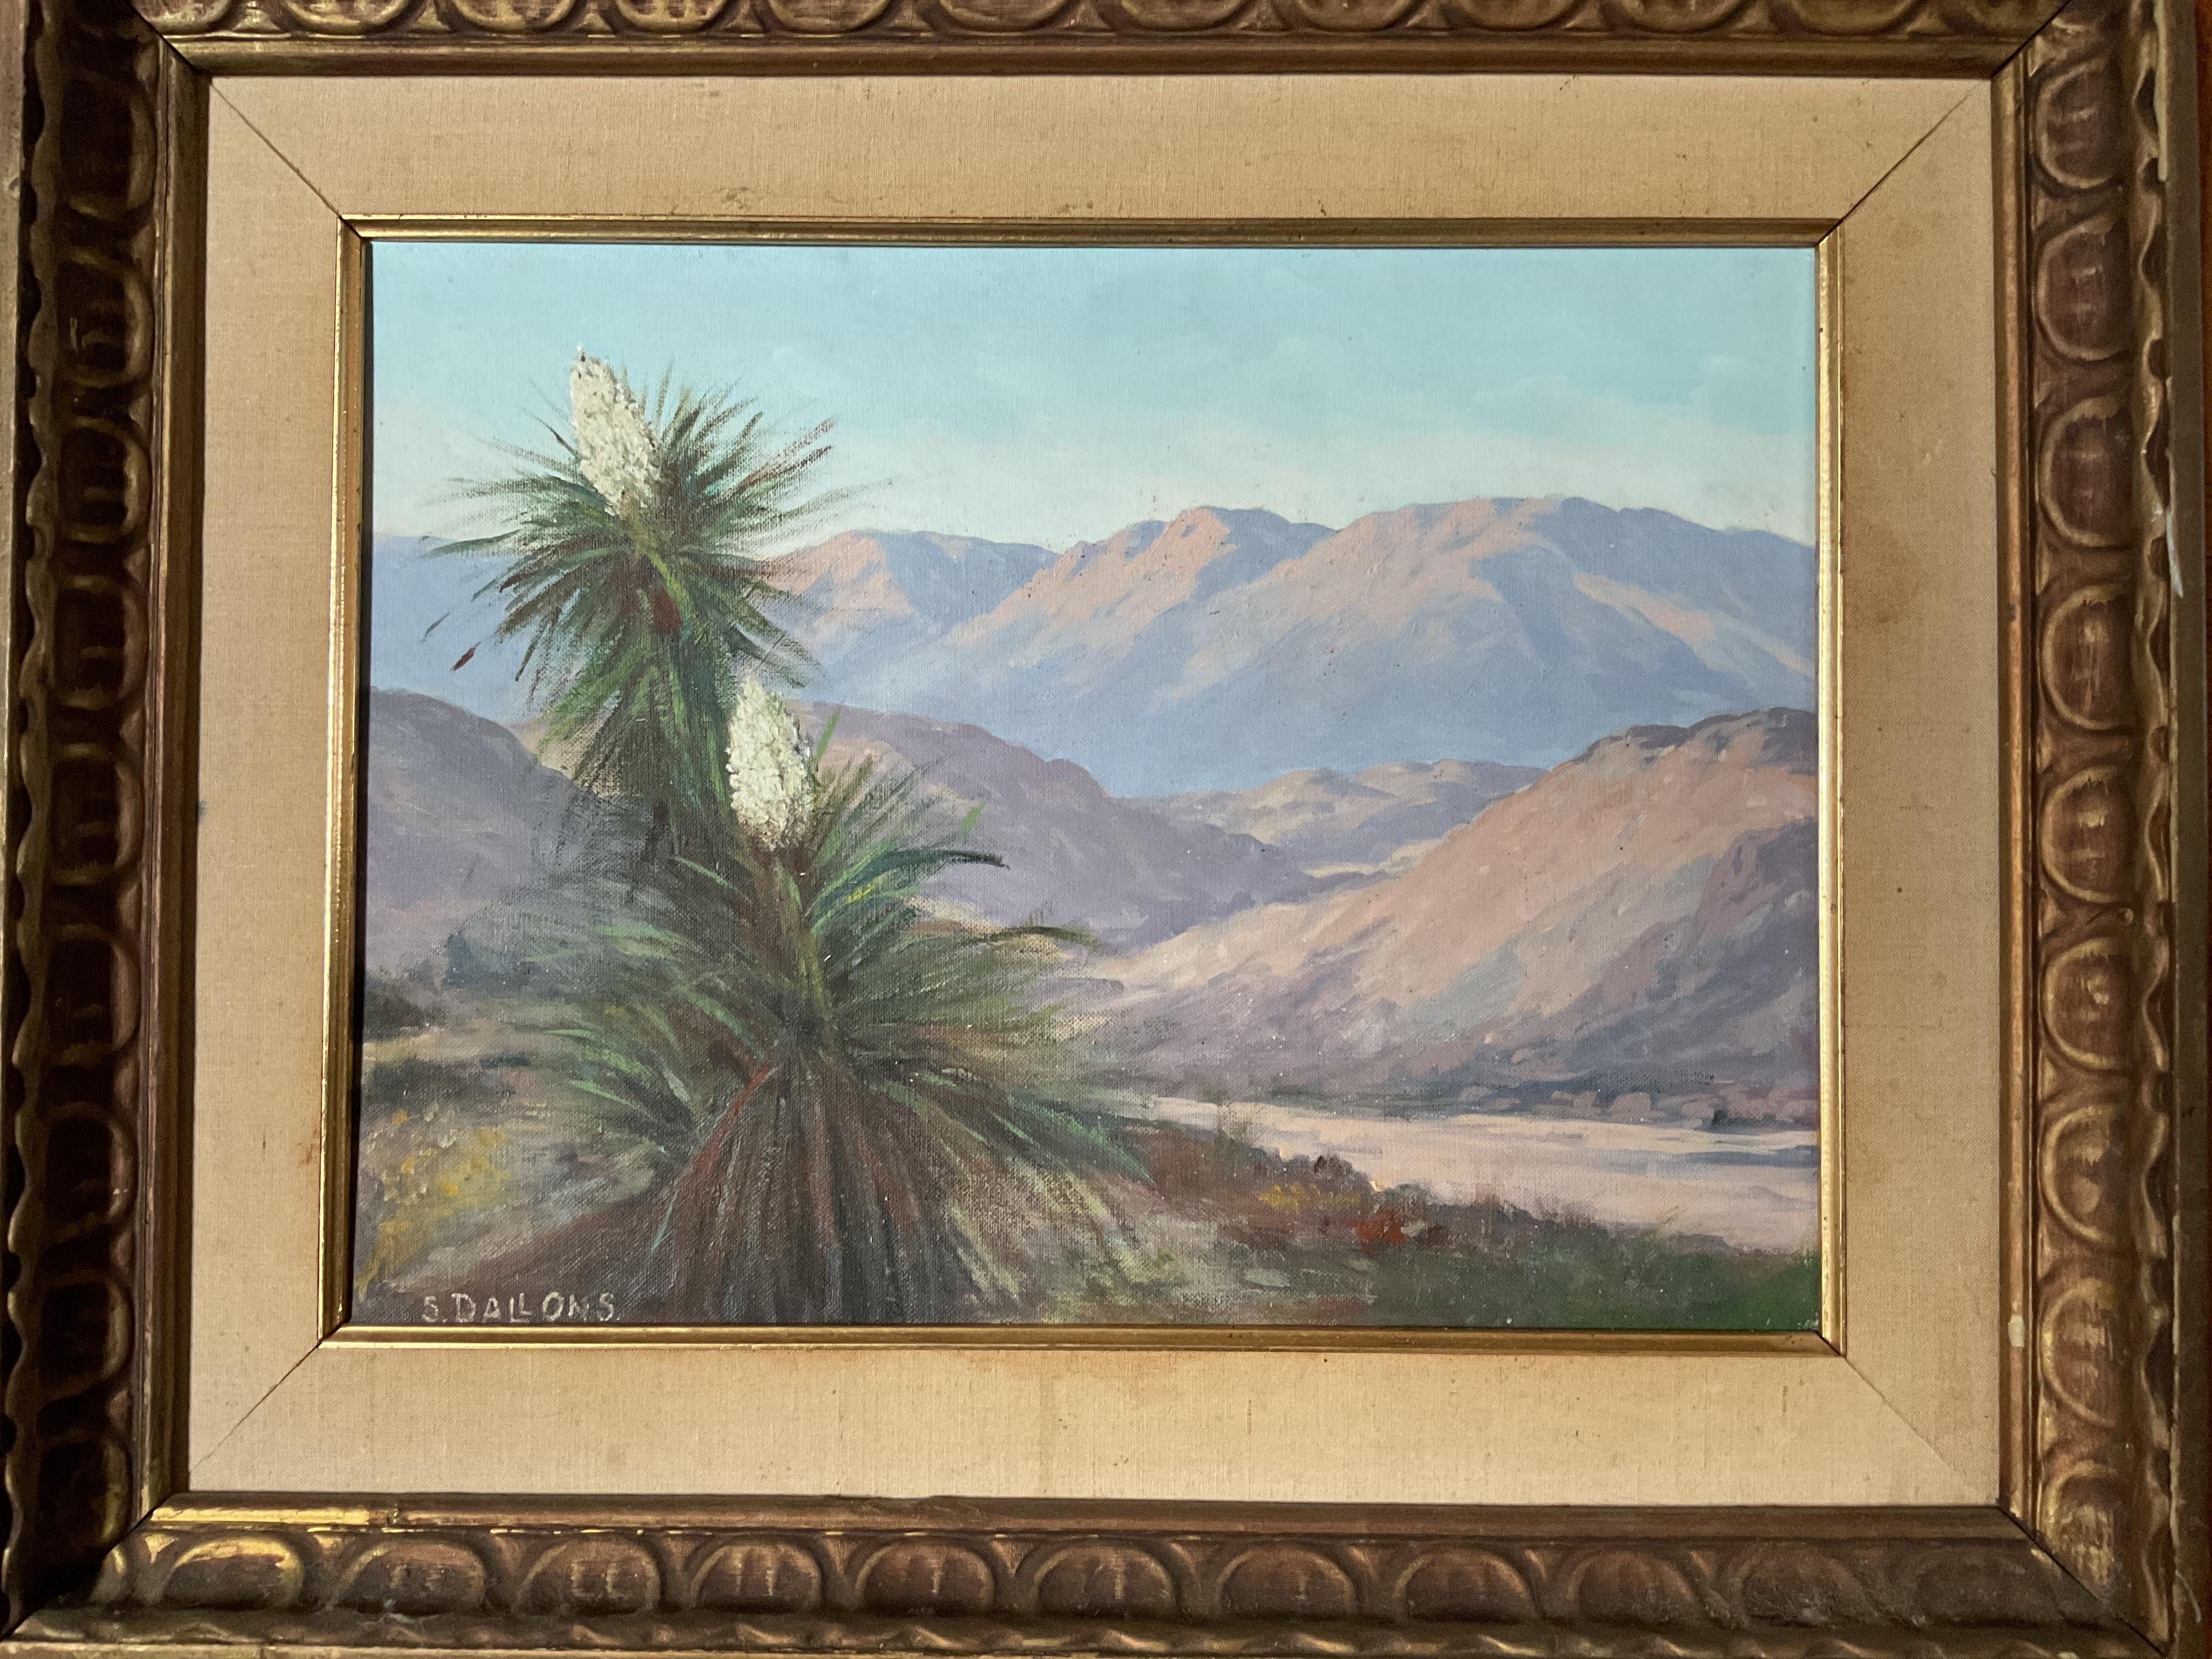 This is an unusual painting of a canyon in the Palm Springs area of Southern California.  In the foreground is a blooming native plant, with a nice close up view.  Think of it as a portrait within a semi-arid landscape setting.  The background